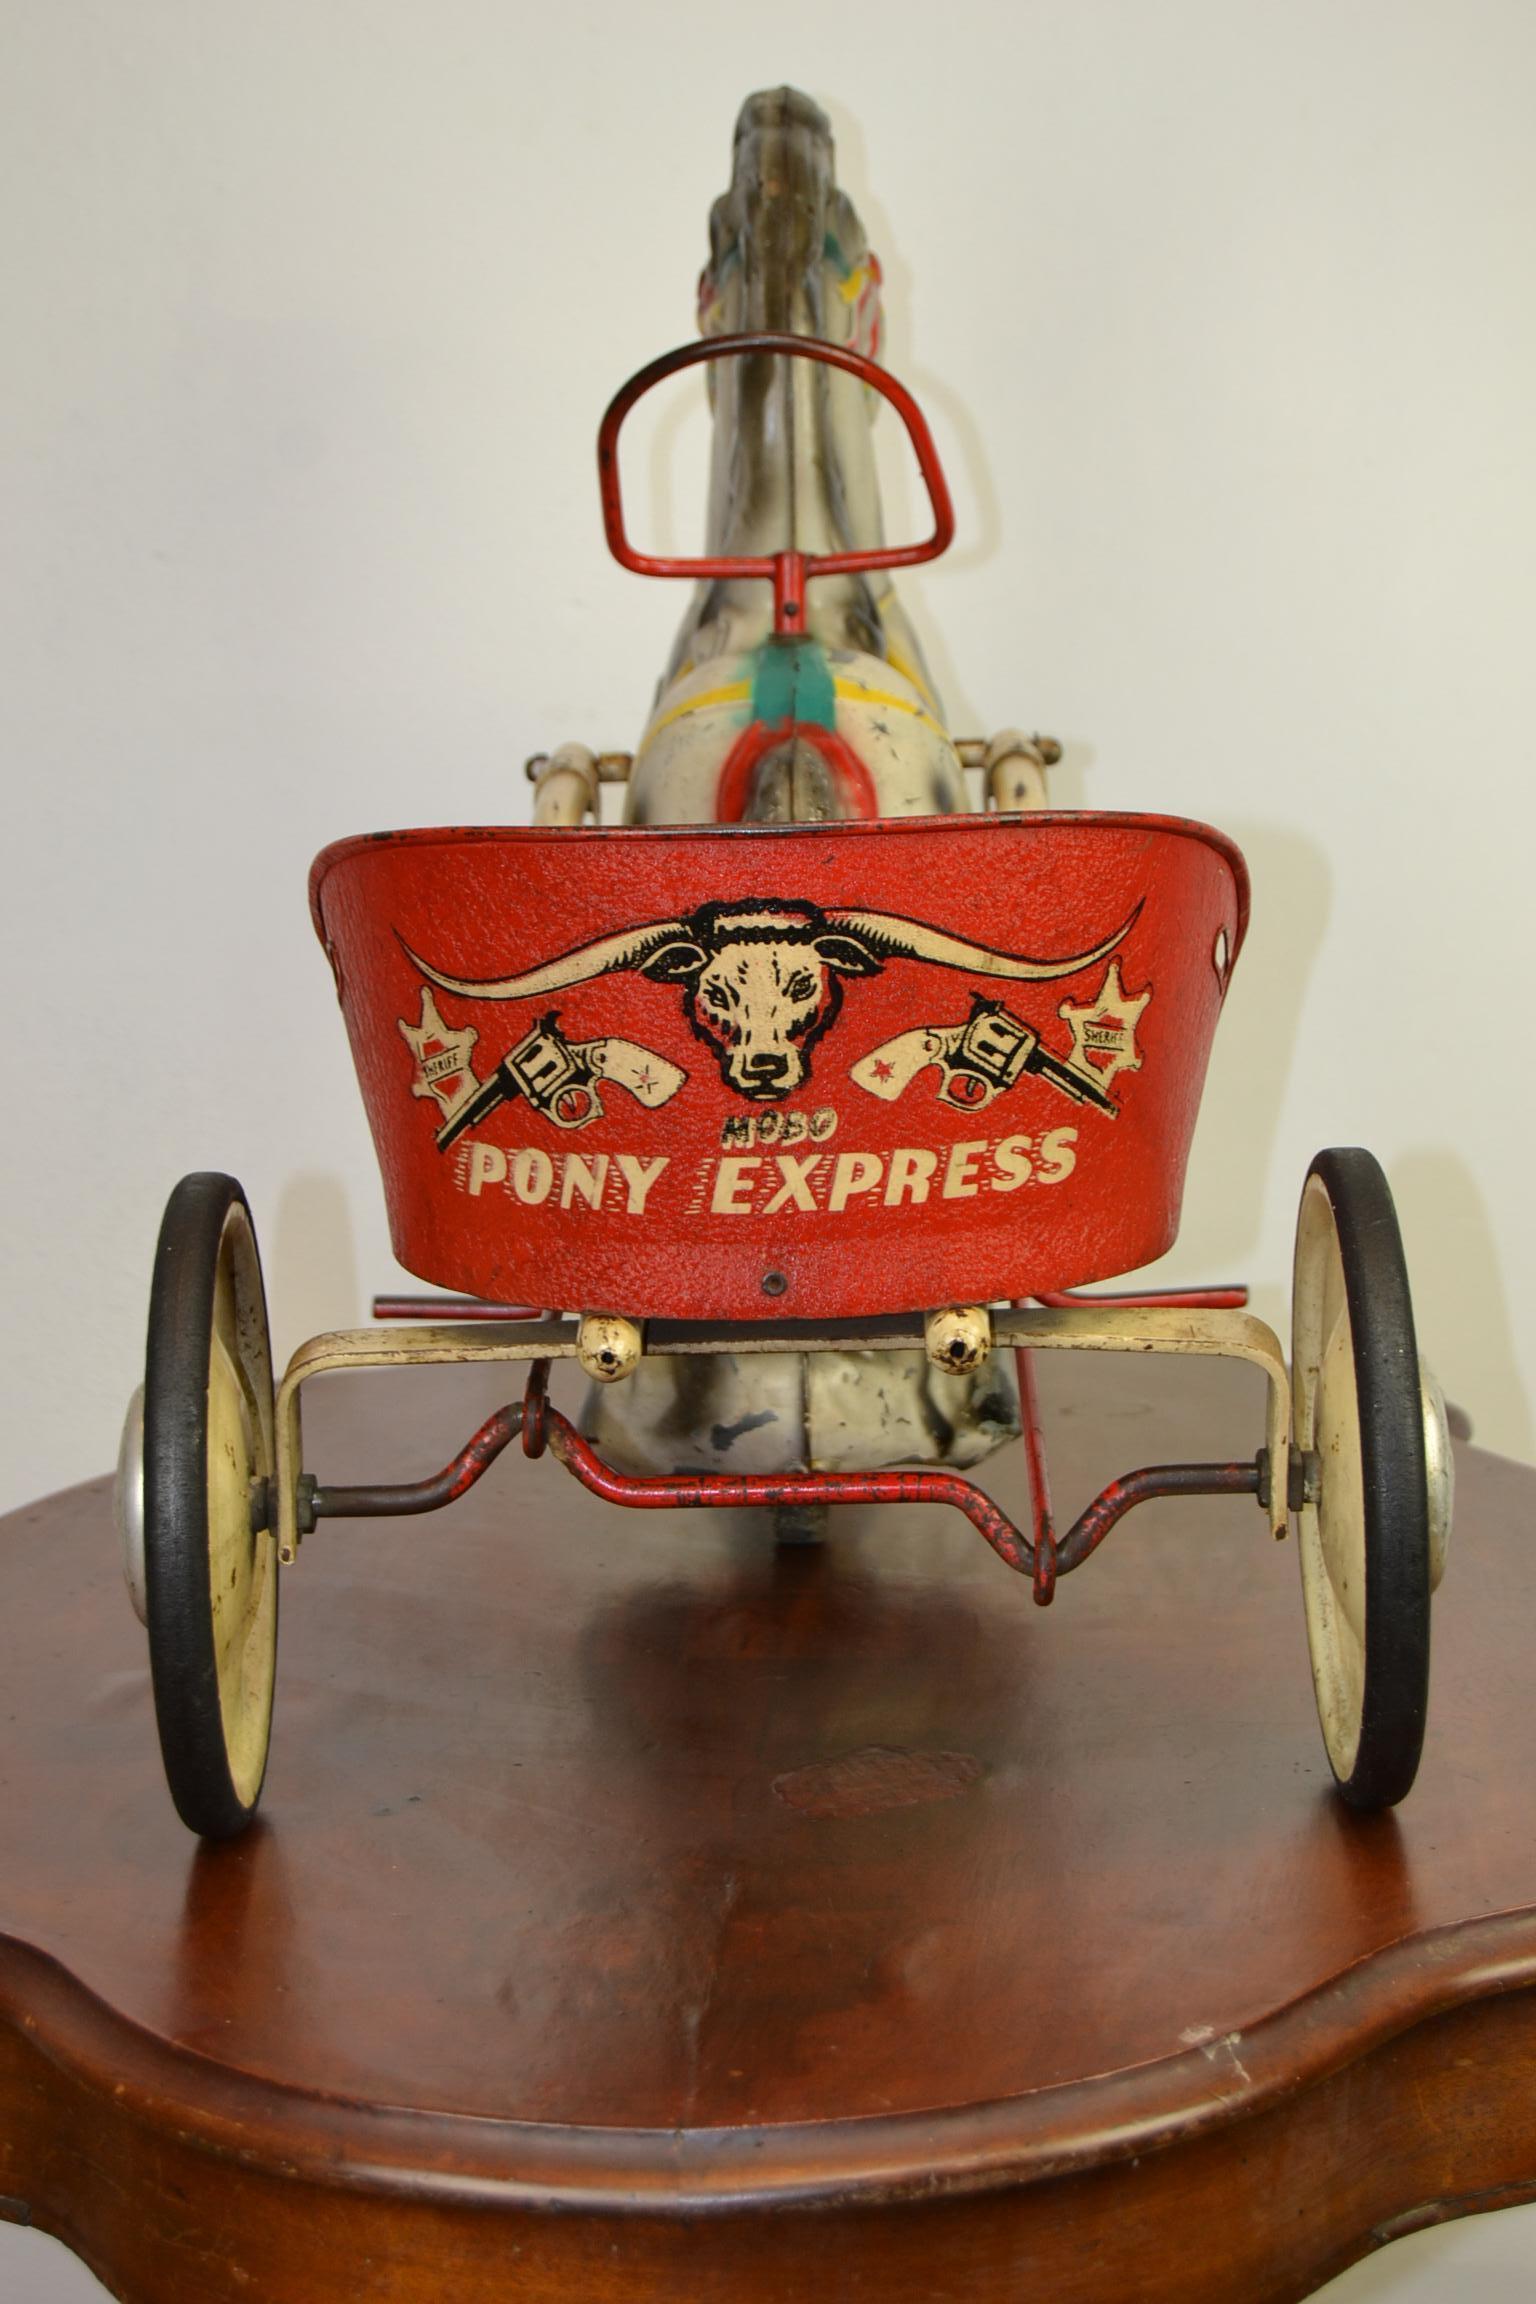 1950s vintage Mobo Toys pony express pedal toy.
This Carrey Trailer with Horse was made by Sebel Mobo Toy, D. Sebel & co Erith Kent, England.
It's a pressed steel toy with pedals of a cute pony with a Carrey trailer cart. 

This child's ride